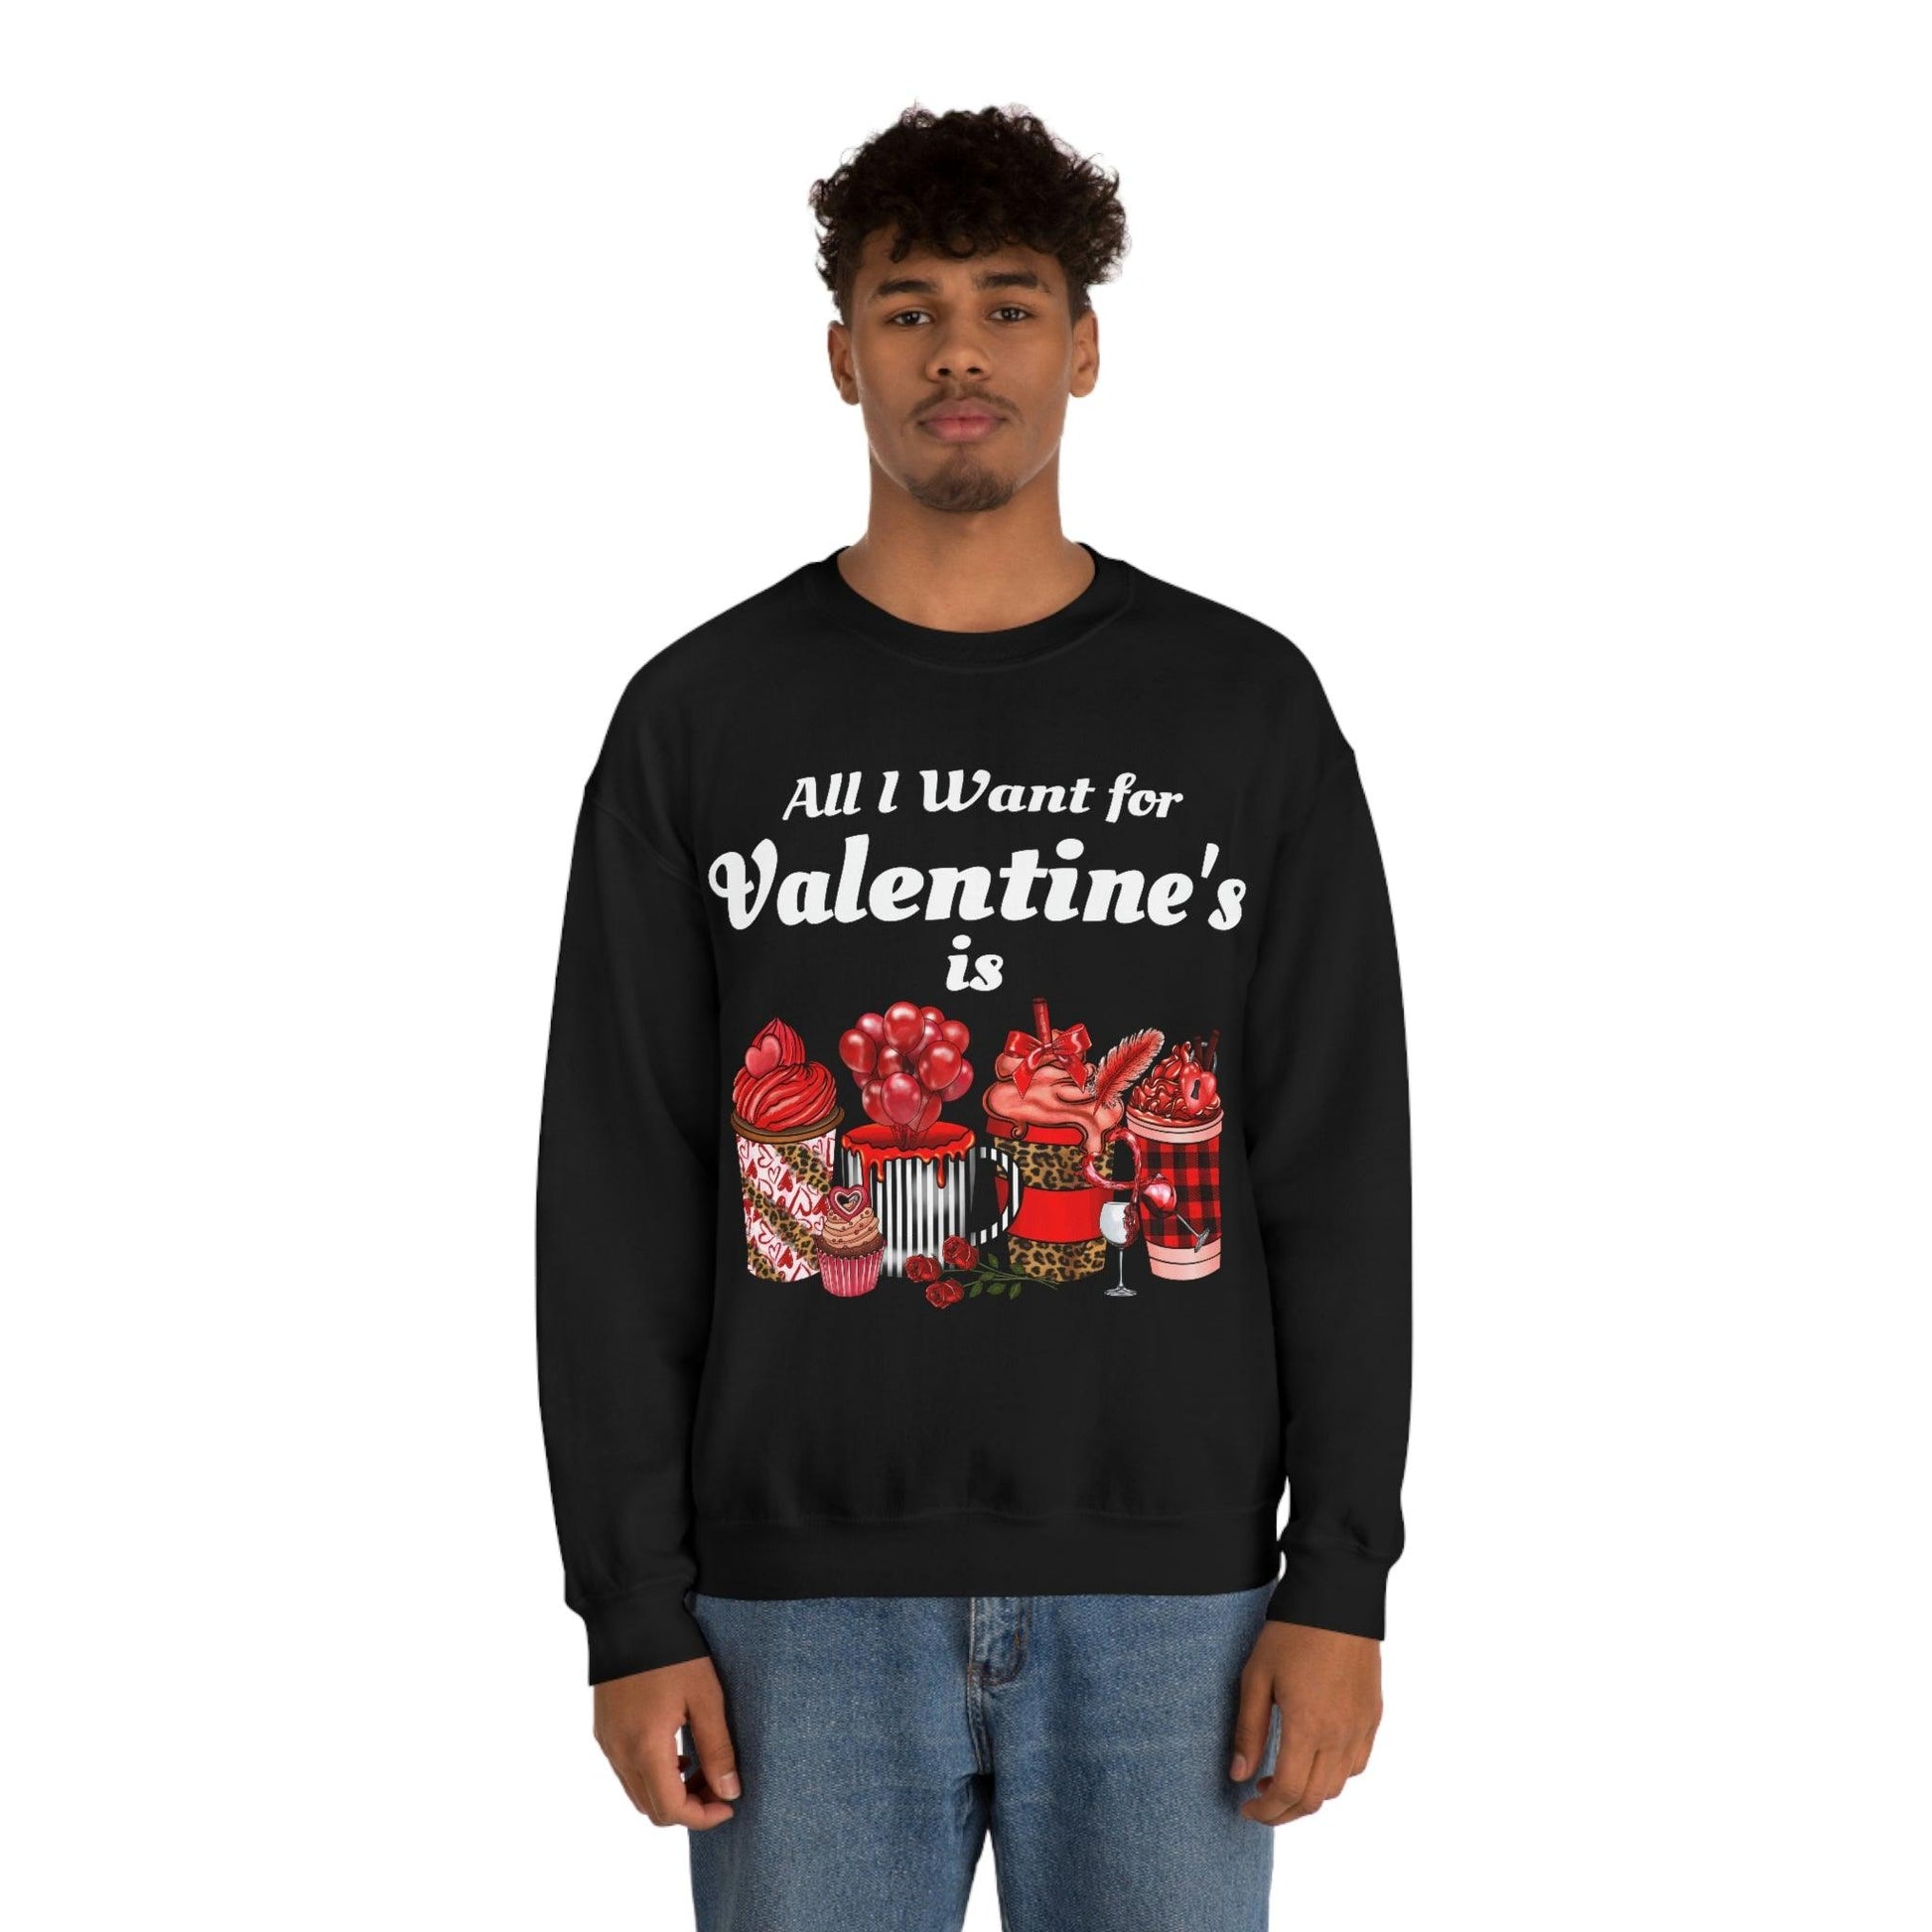 All I want for Valentines is Coffee Sweatshirt - Giftsmojo